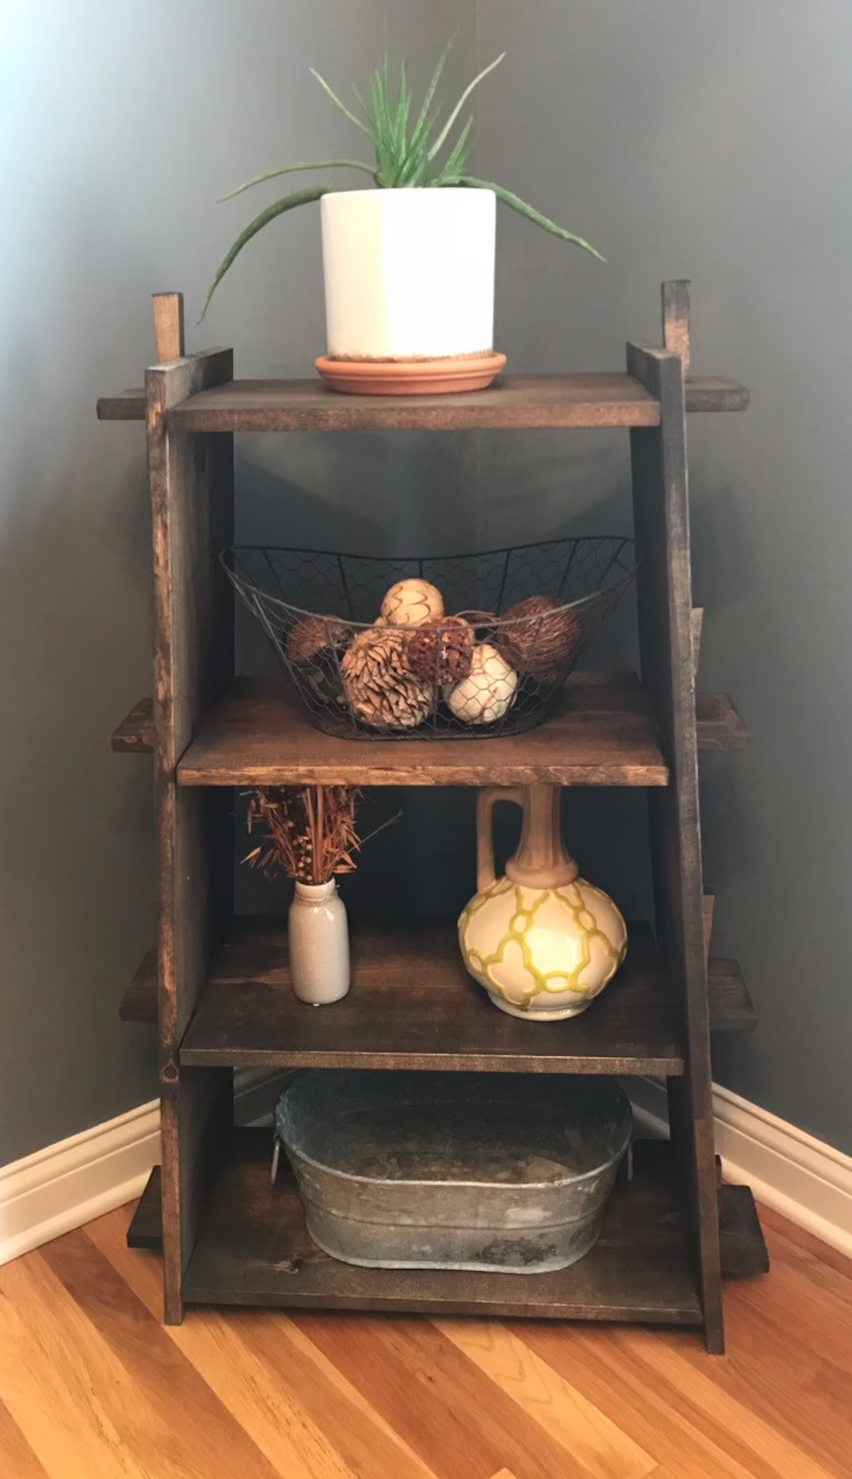 A reclaimed wooden shelf with objects on it. 